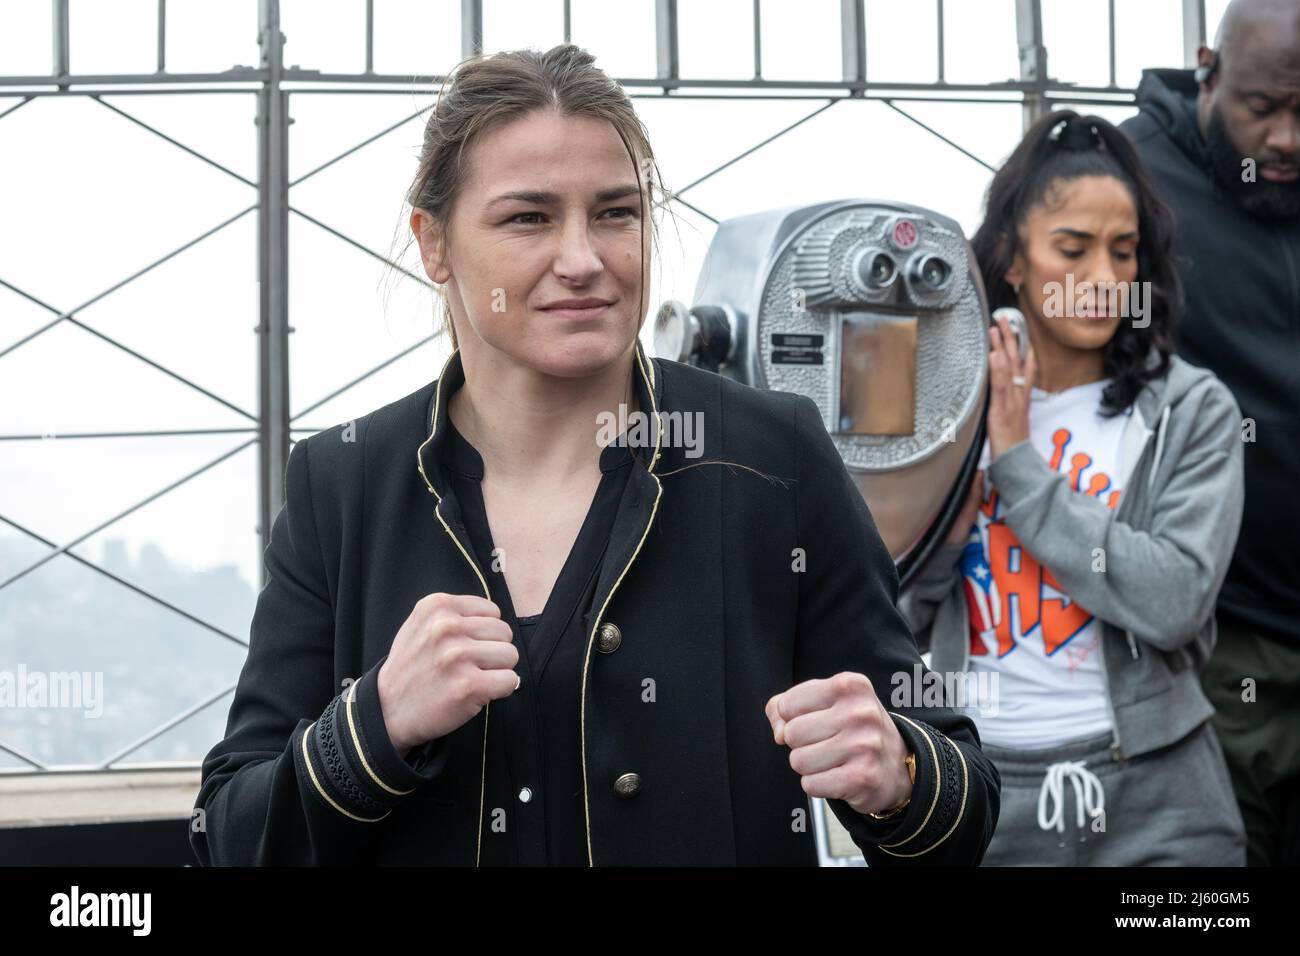 New York, USA. 26th Apr, 2022. Undisputed World Lightweight Champion Katie Taylor of Ireland (L) poses in front of Seven-division World Champion Amanda Serrano of Puerto Rico during a promotional event at the observatory atop the Empire State building. The top two female boxers in the world turned on the lights of the iconic New York City landmark with the colors of Ireland and Puerto Rico ahead of their history-making fight at the Madison Square Garden for the undisputed World Lightweight Title on Saturday. Credit: Enrique Shore/Alamy Live News Stock Photo